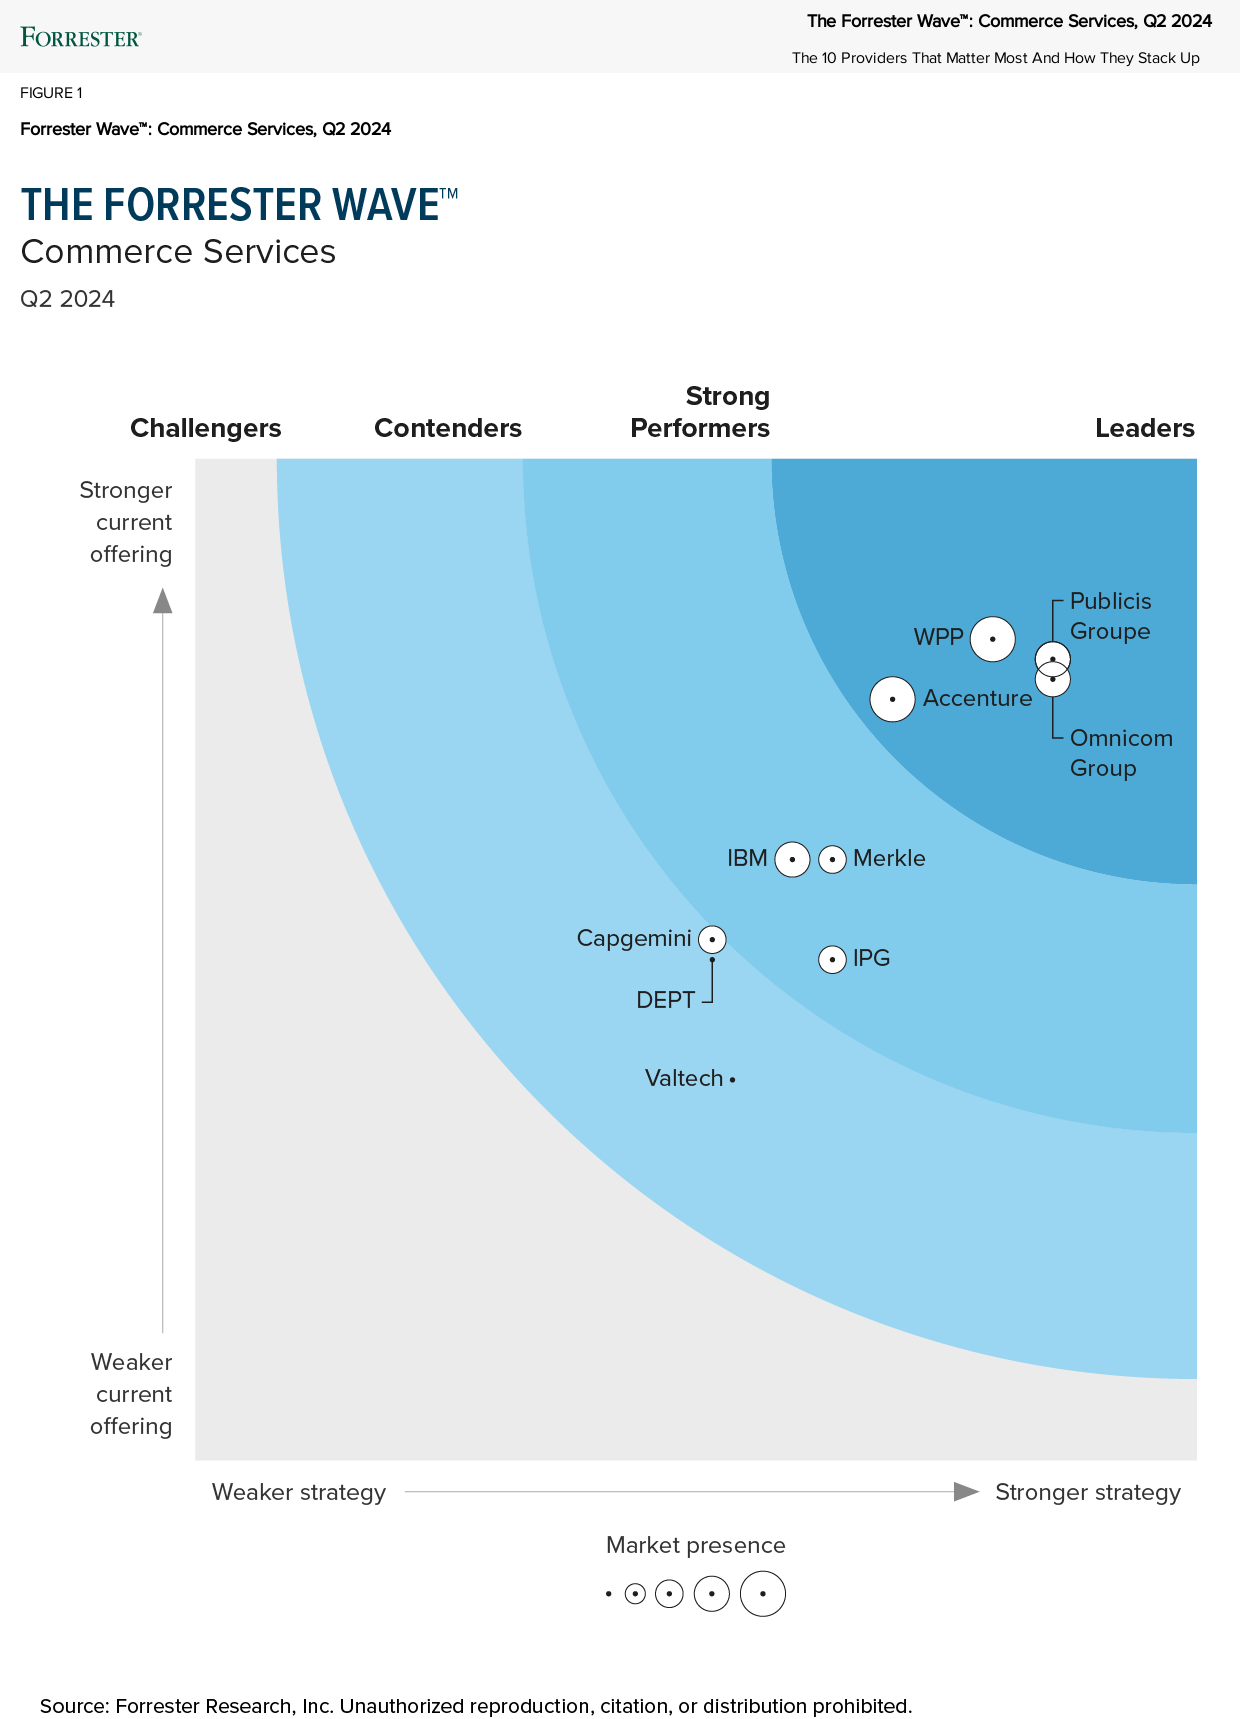 DEPT® is named one of Forrester’s 10 top Commerce Services Providers